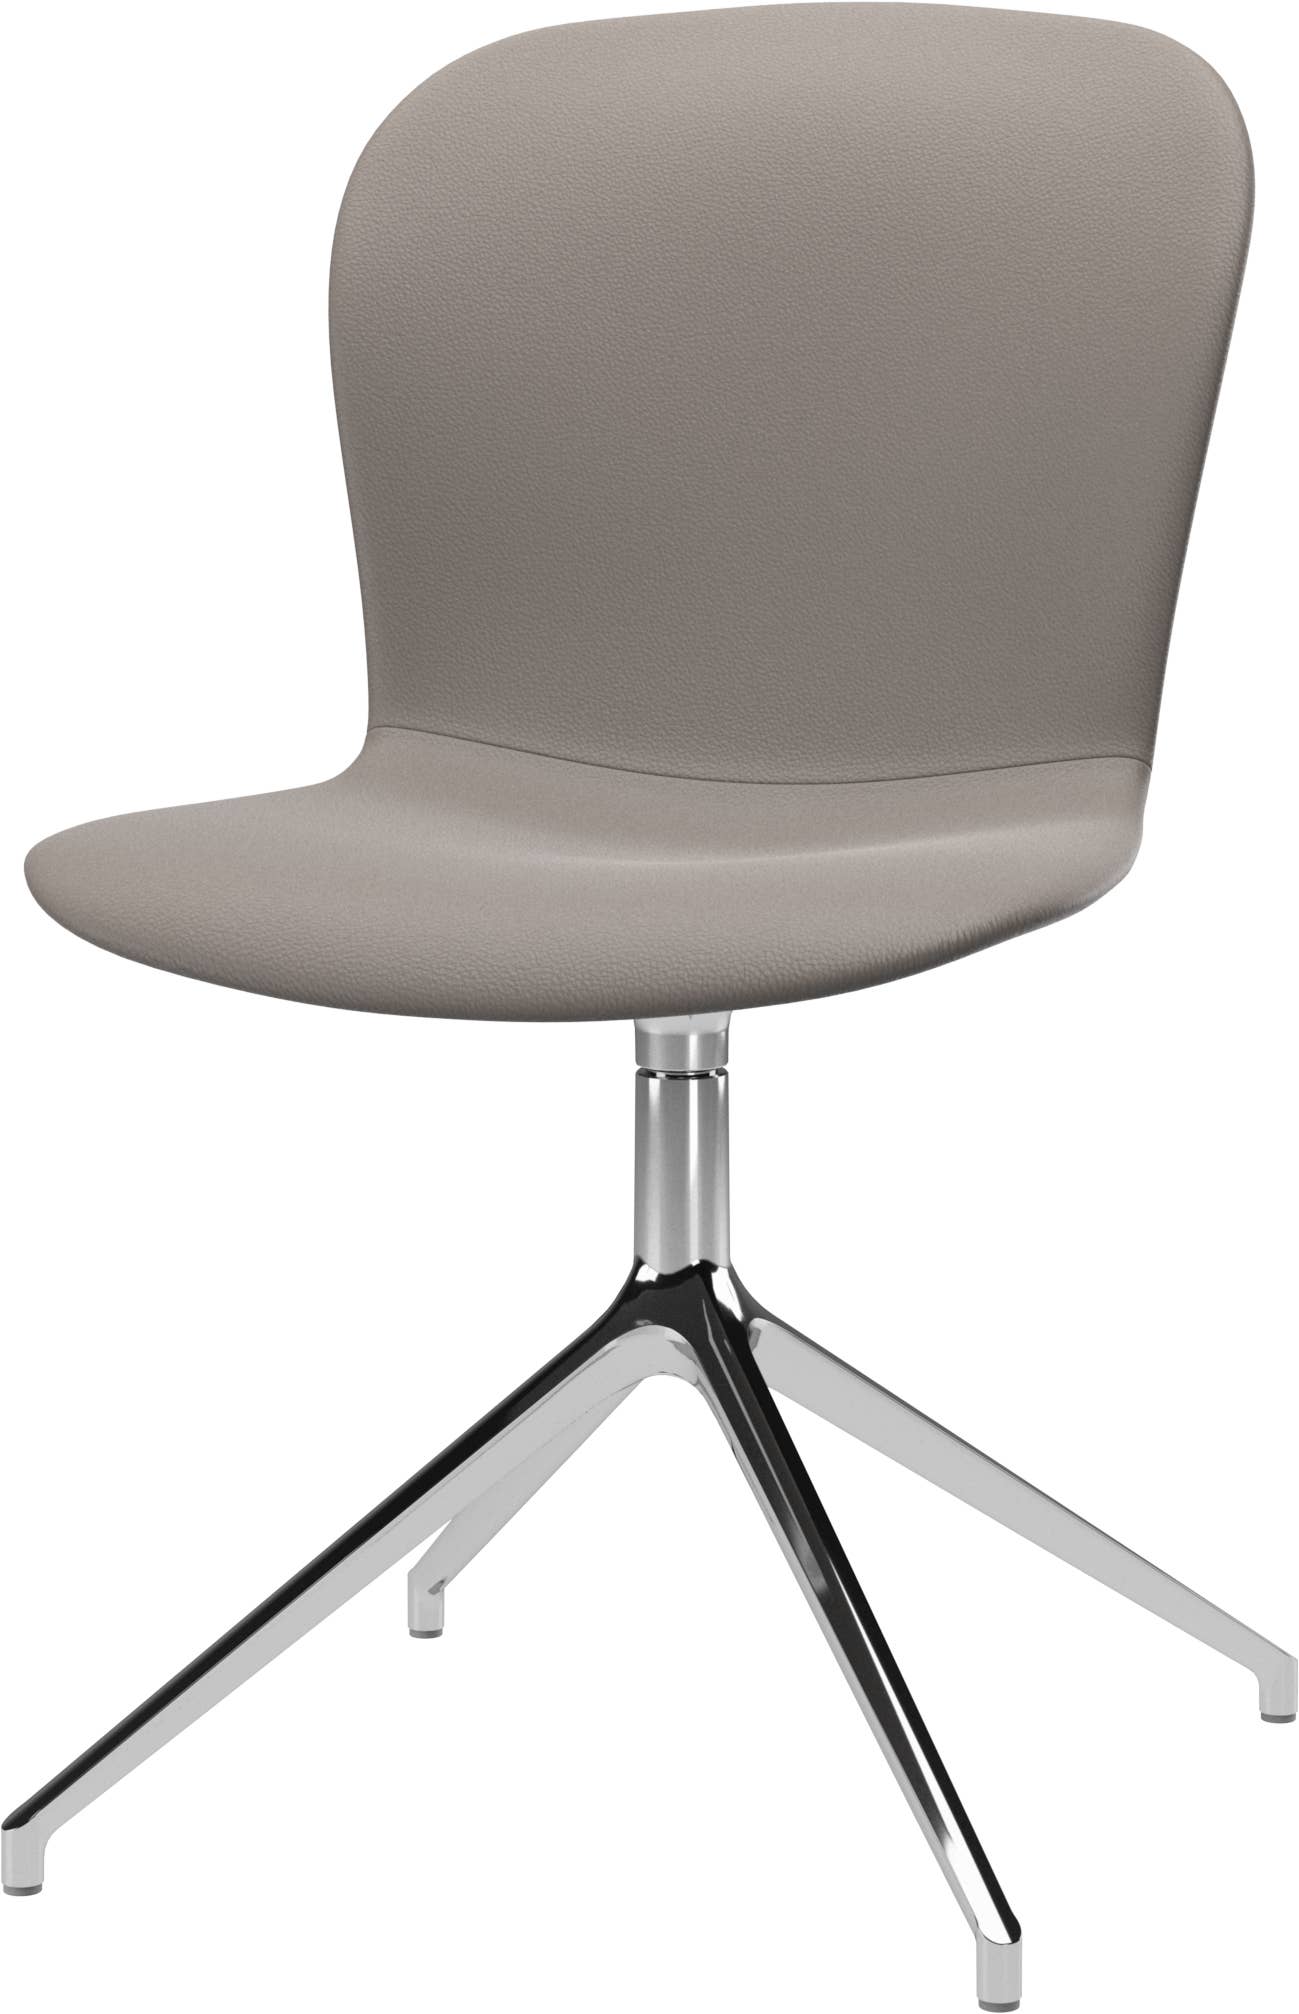 Adelaide chair with swivel function | BoConcept